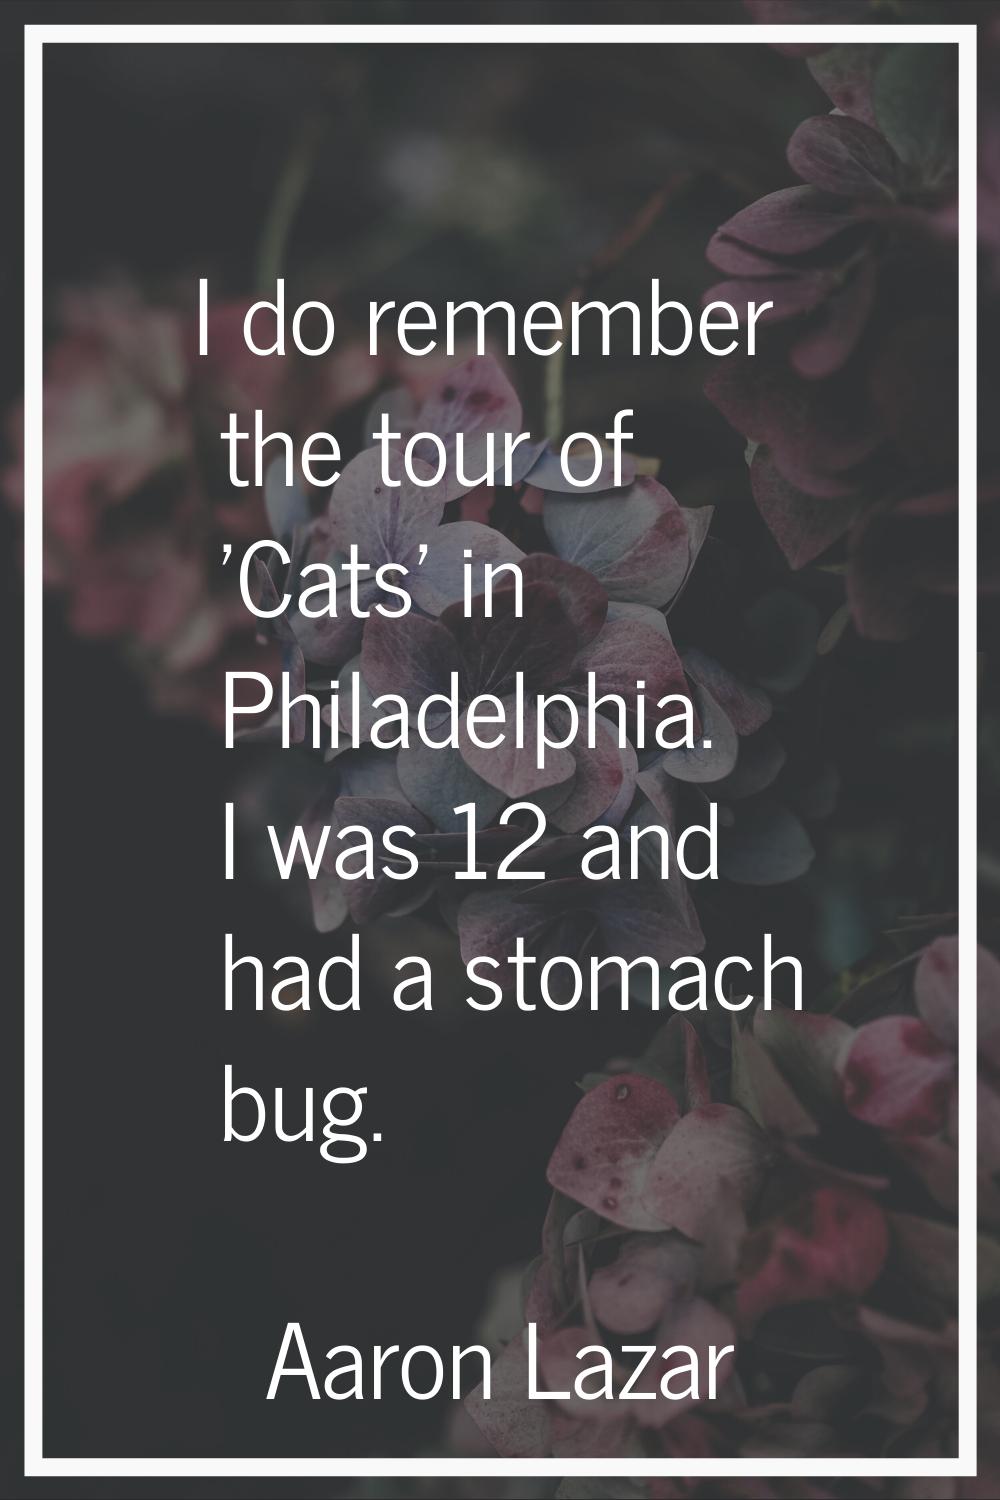 I do remember the tour of 'Cats' in Philadelphia. I was 12 and had a stomach bug.